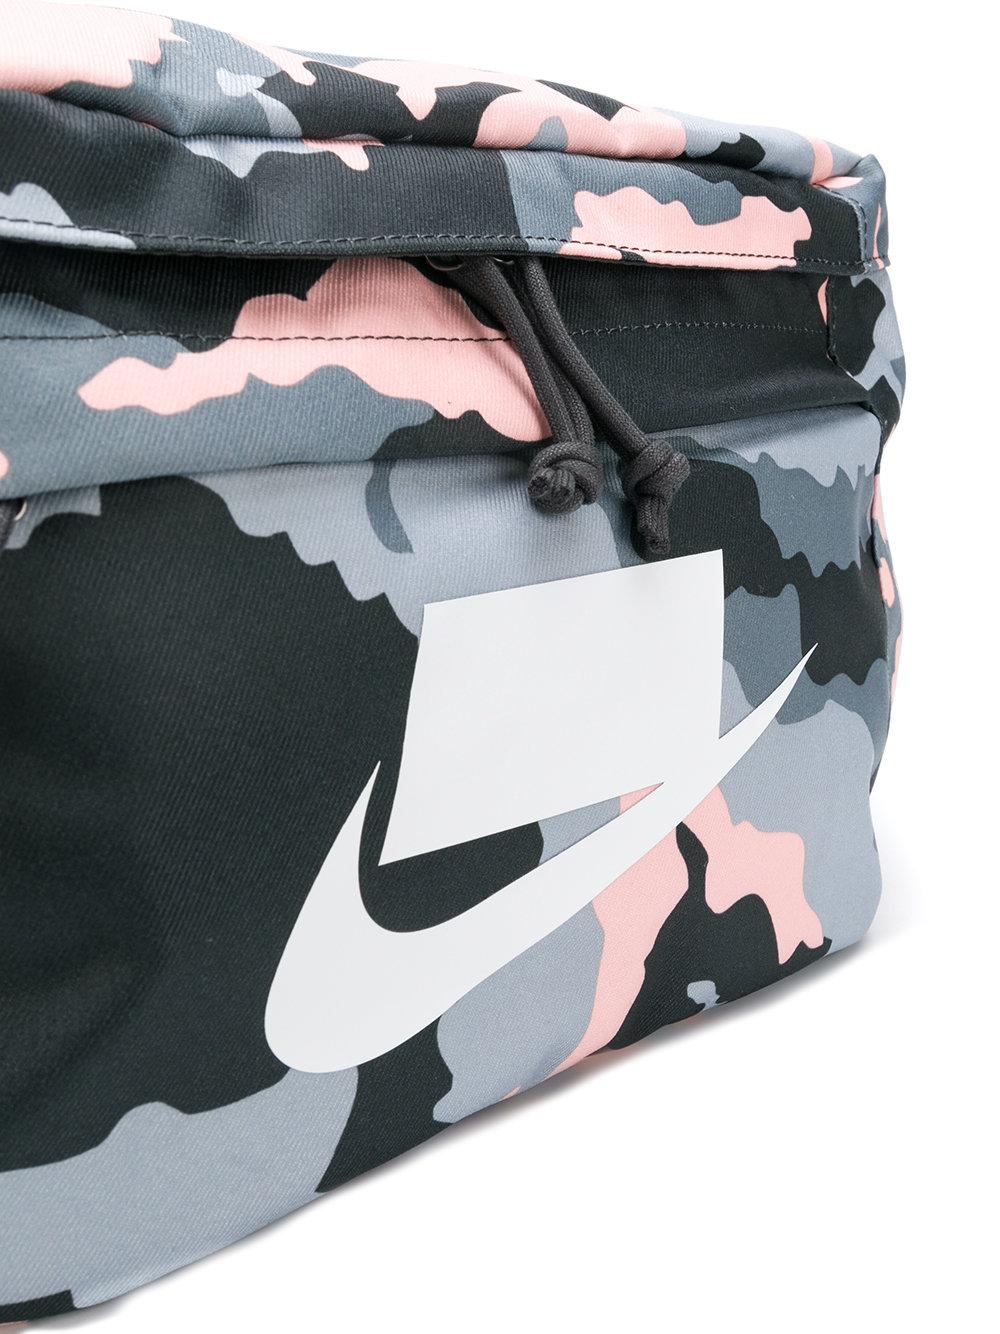 Nike Camouflage Bag in Grey (Gray) - Lyst